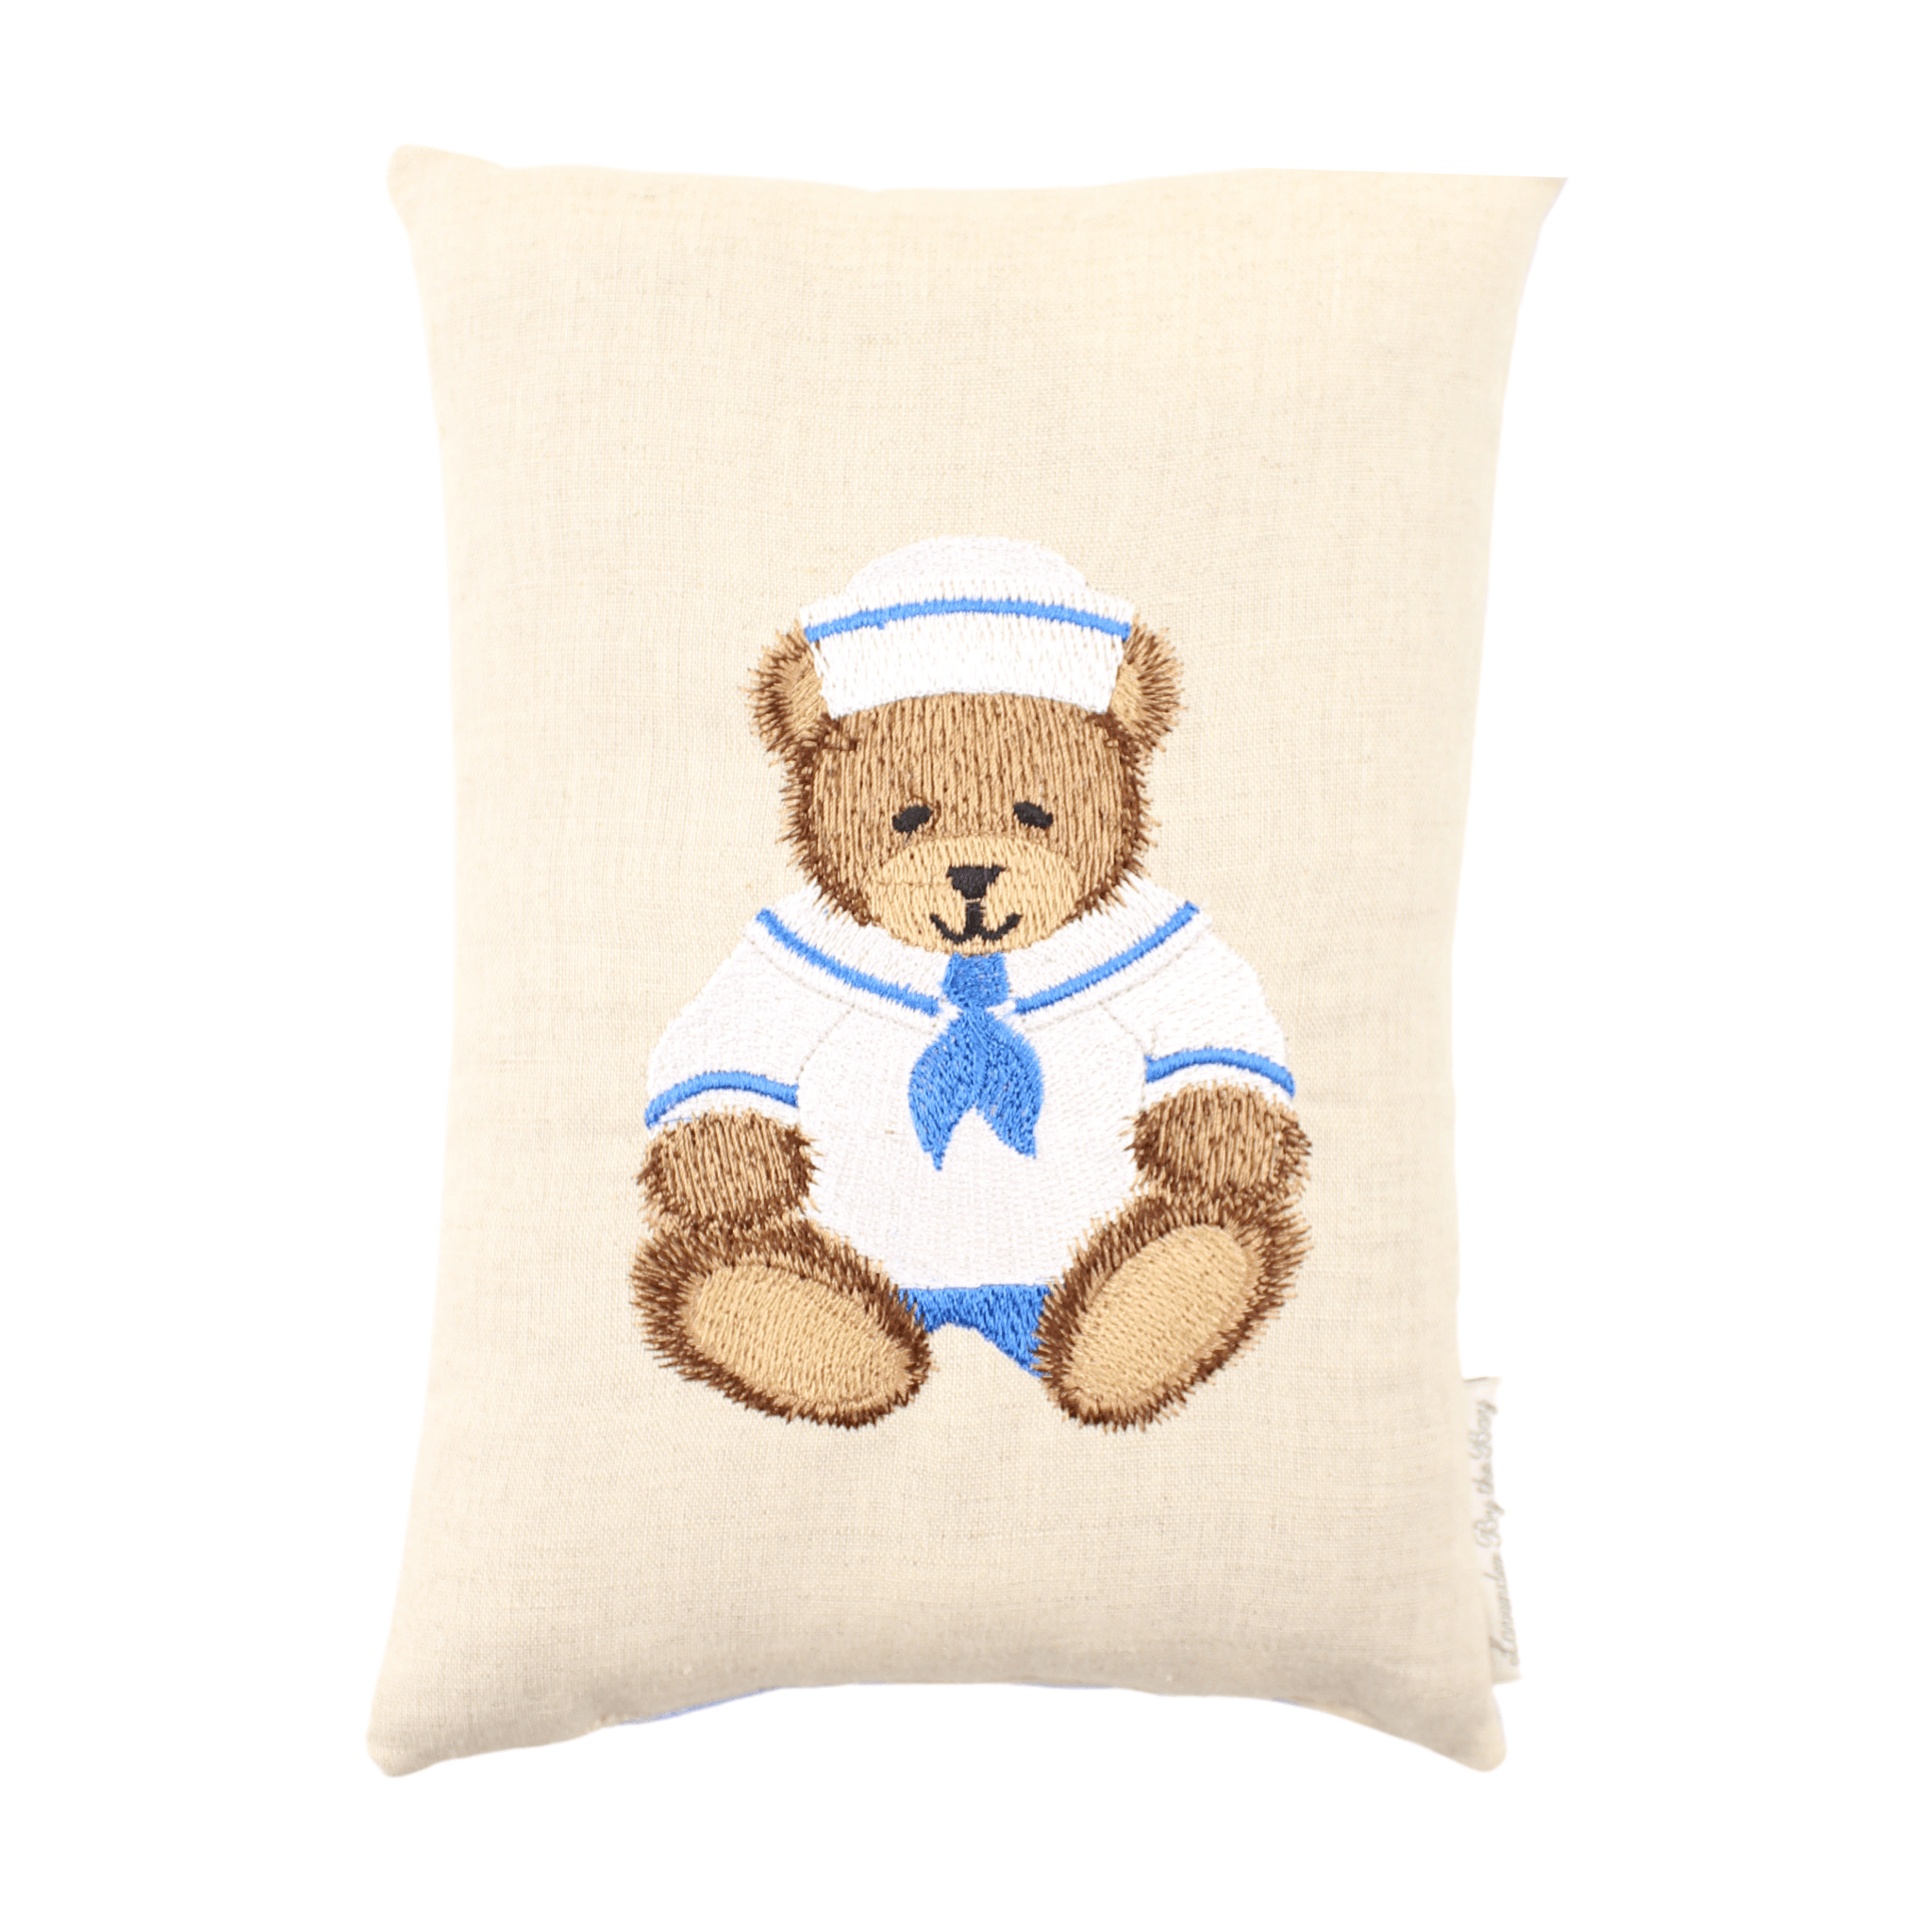 Embroidered Teddy Bear Lavender Filled Sachet - Lavender By The Bay